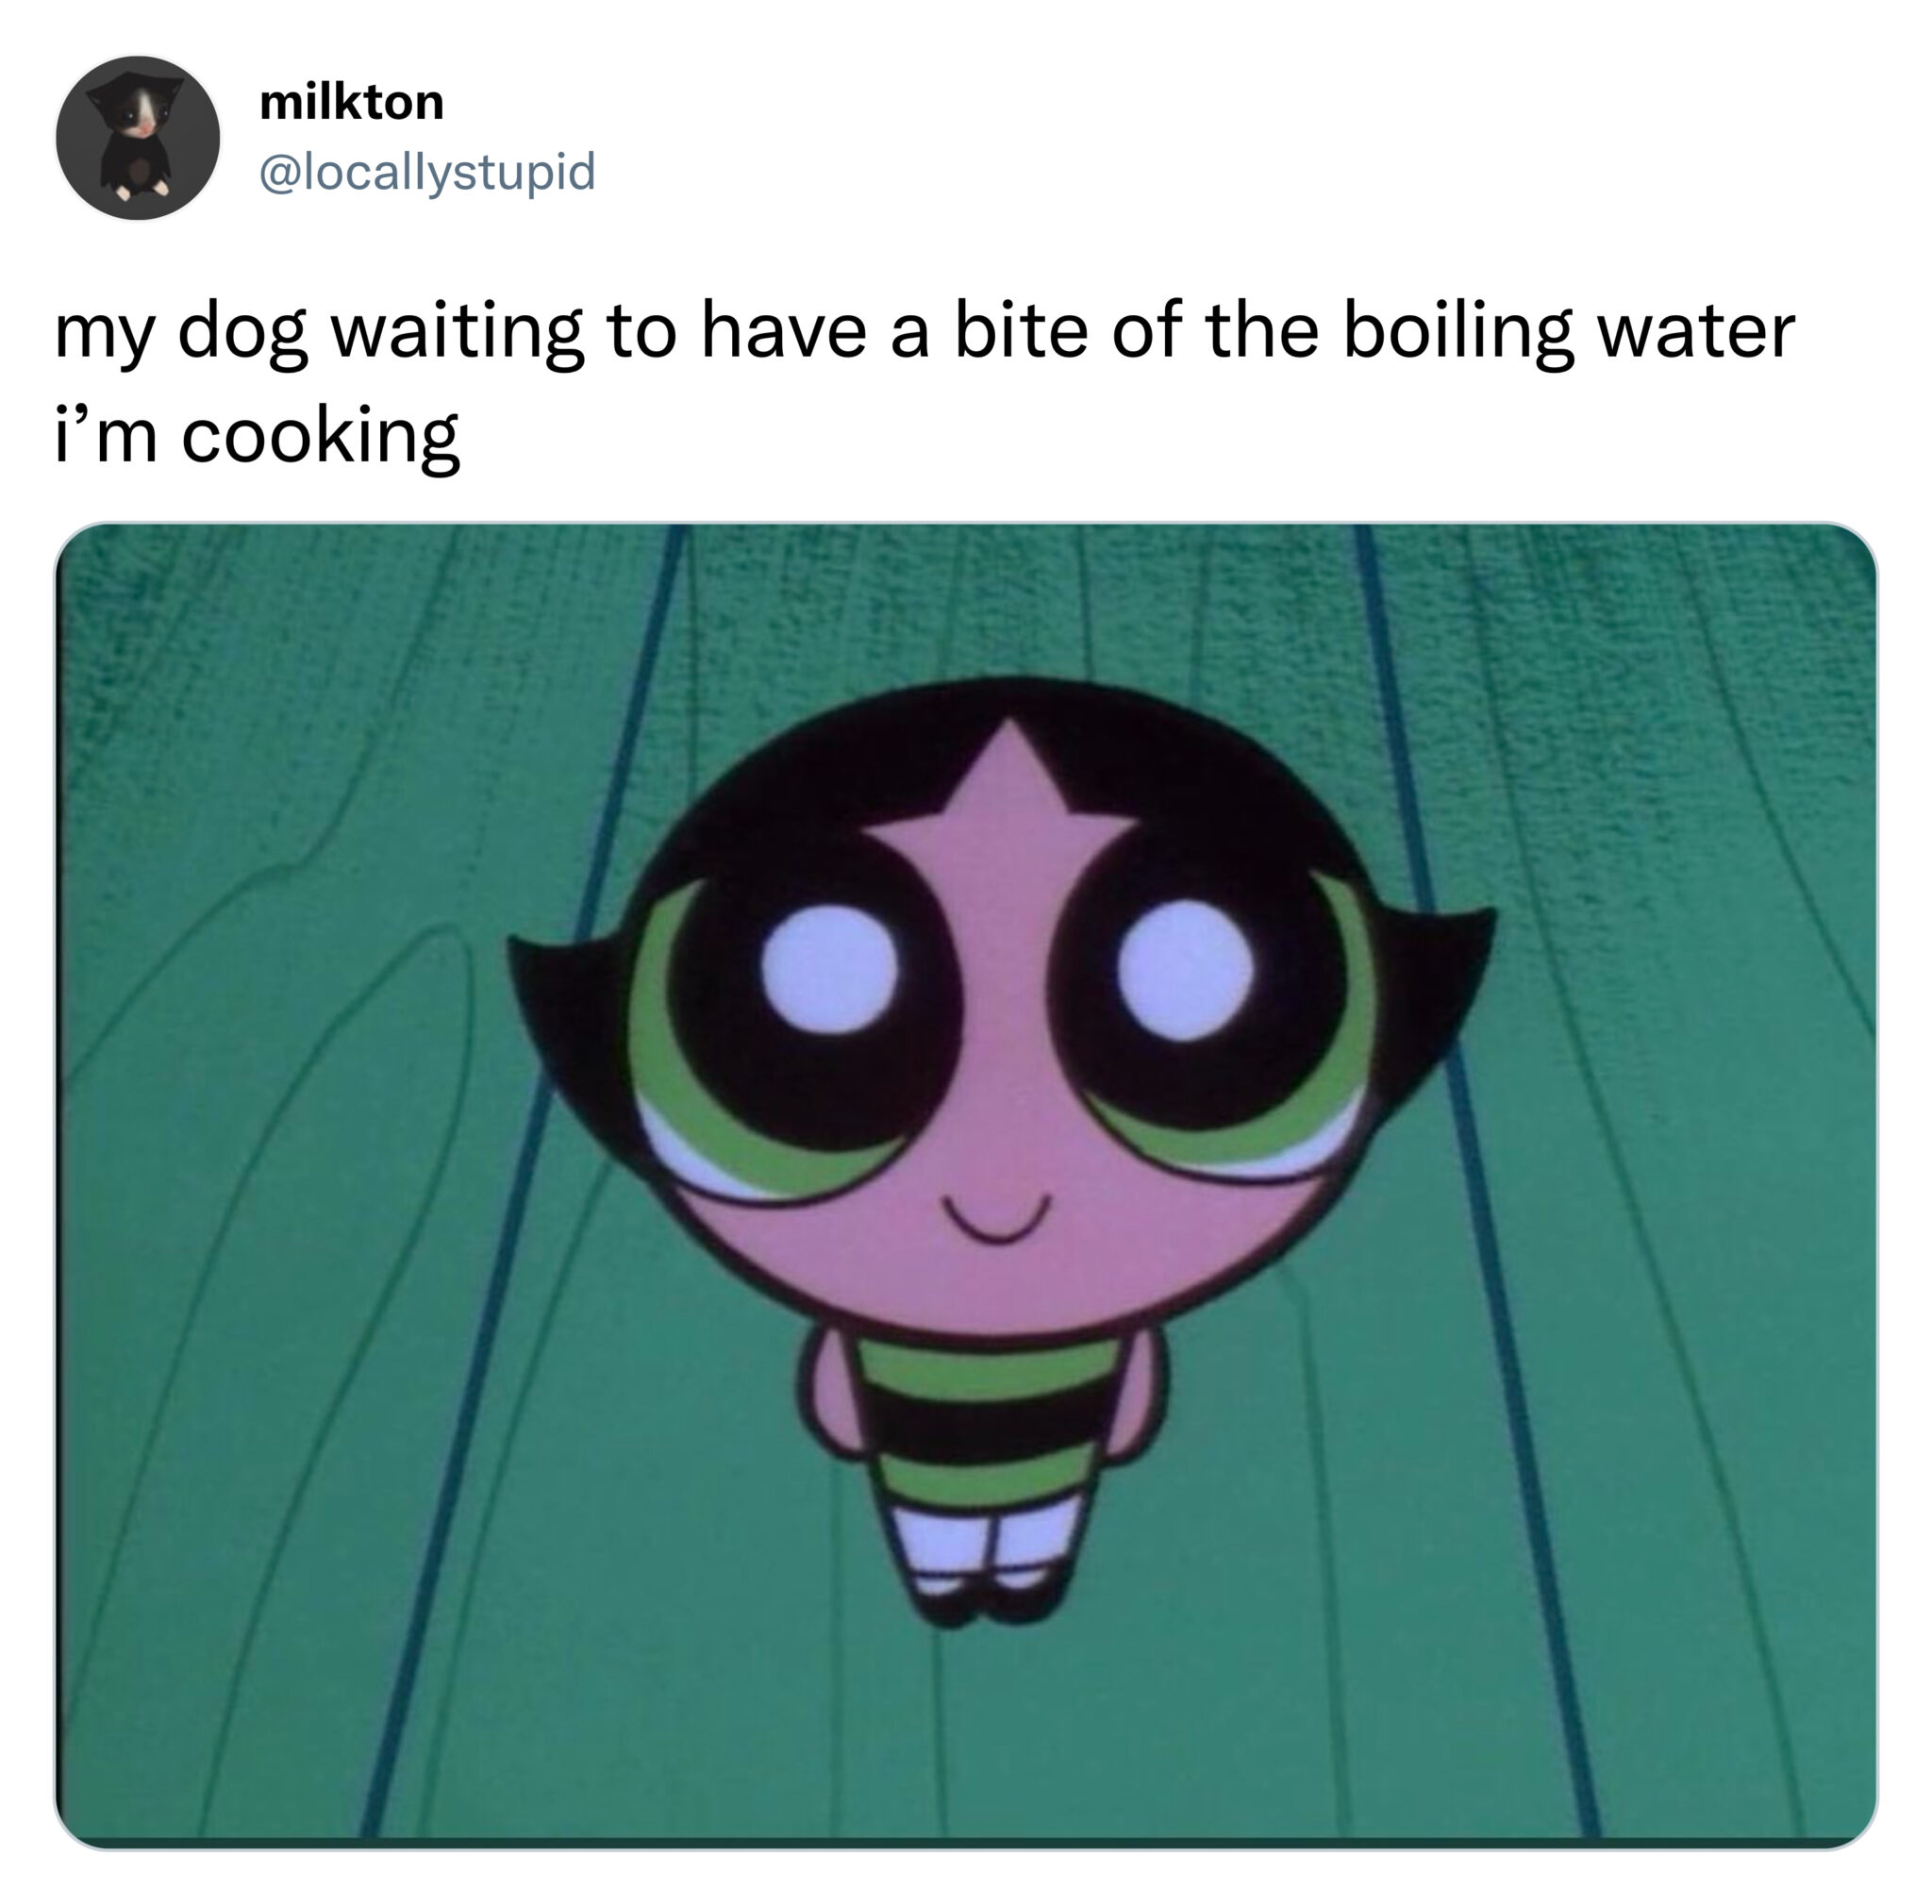 funniest tweets of the week - milkton my dog waiting to have a bite of the boiling water i'm cooking do